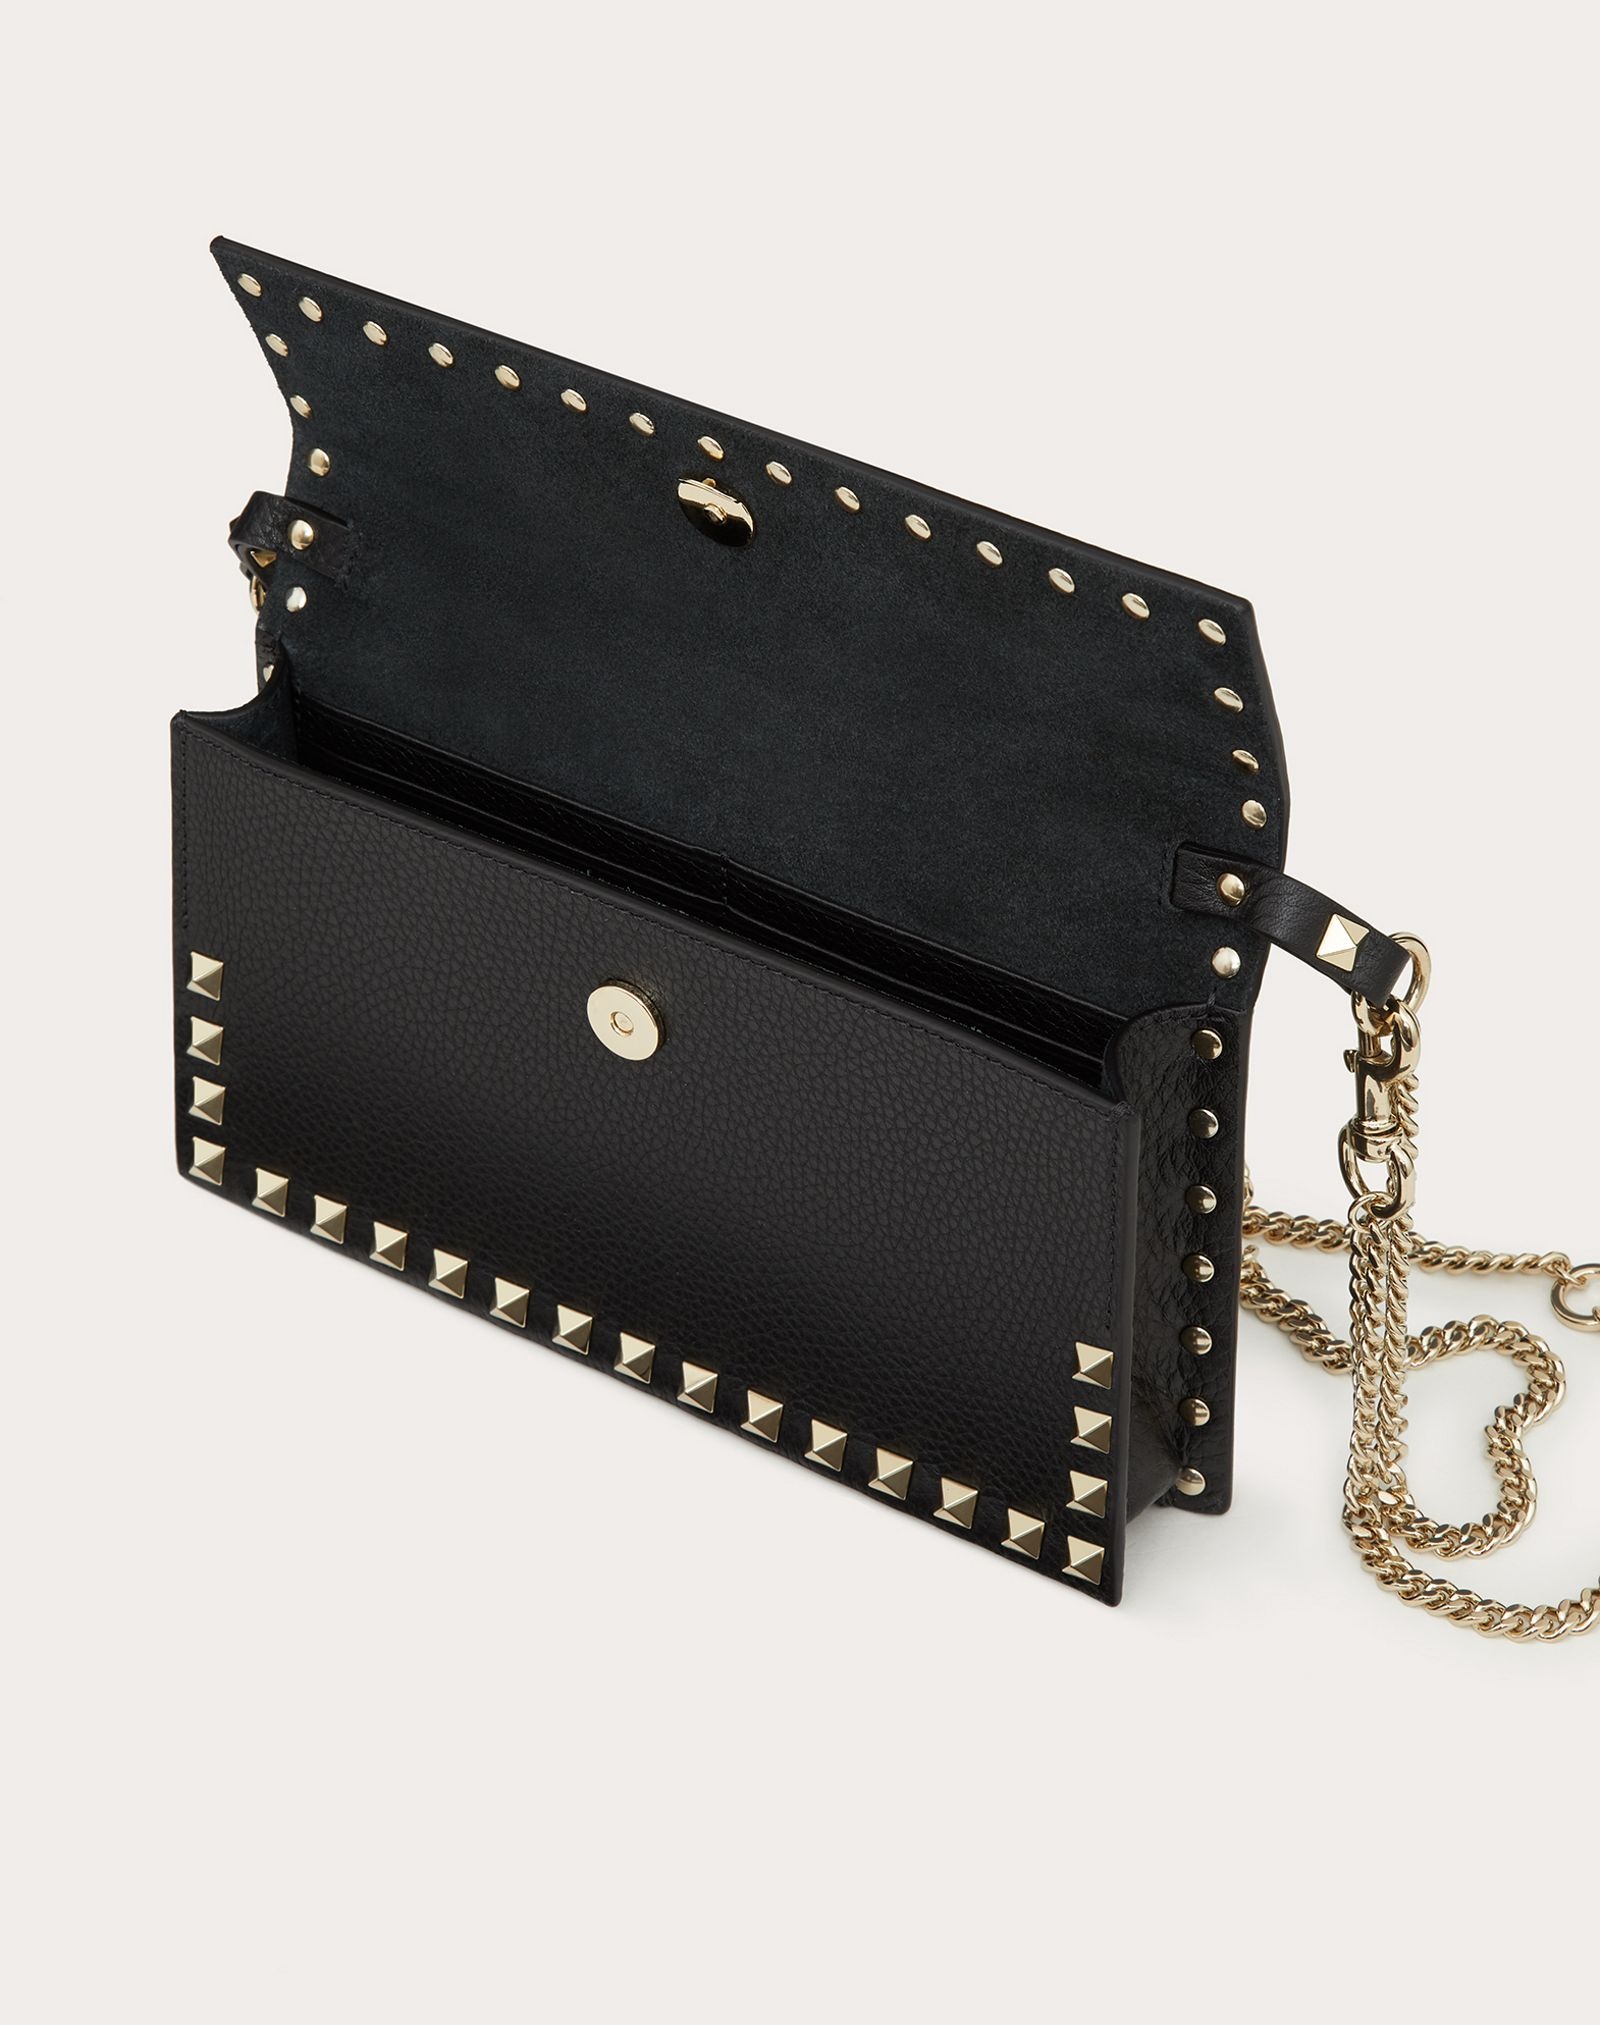 ROCKSTUD GRAINY CALFSKIN POUCH WITH ADJUSTABLE CHAIN STRAP - 6